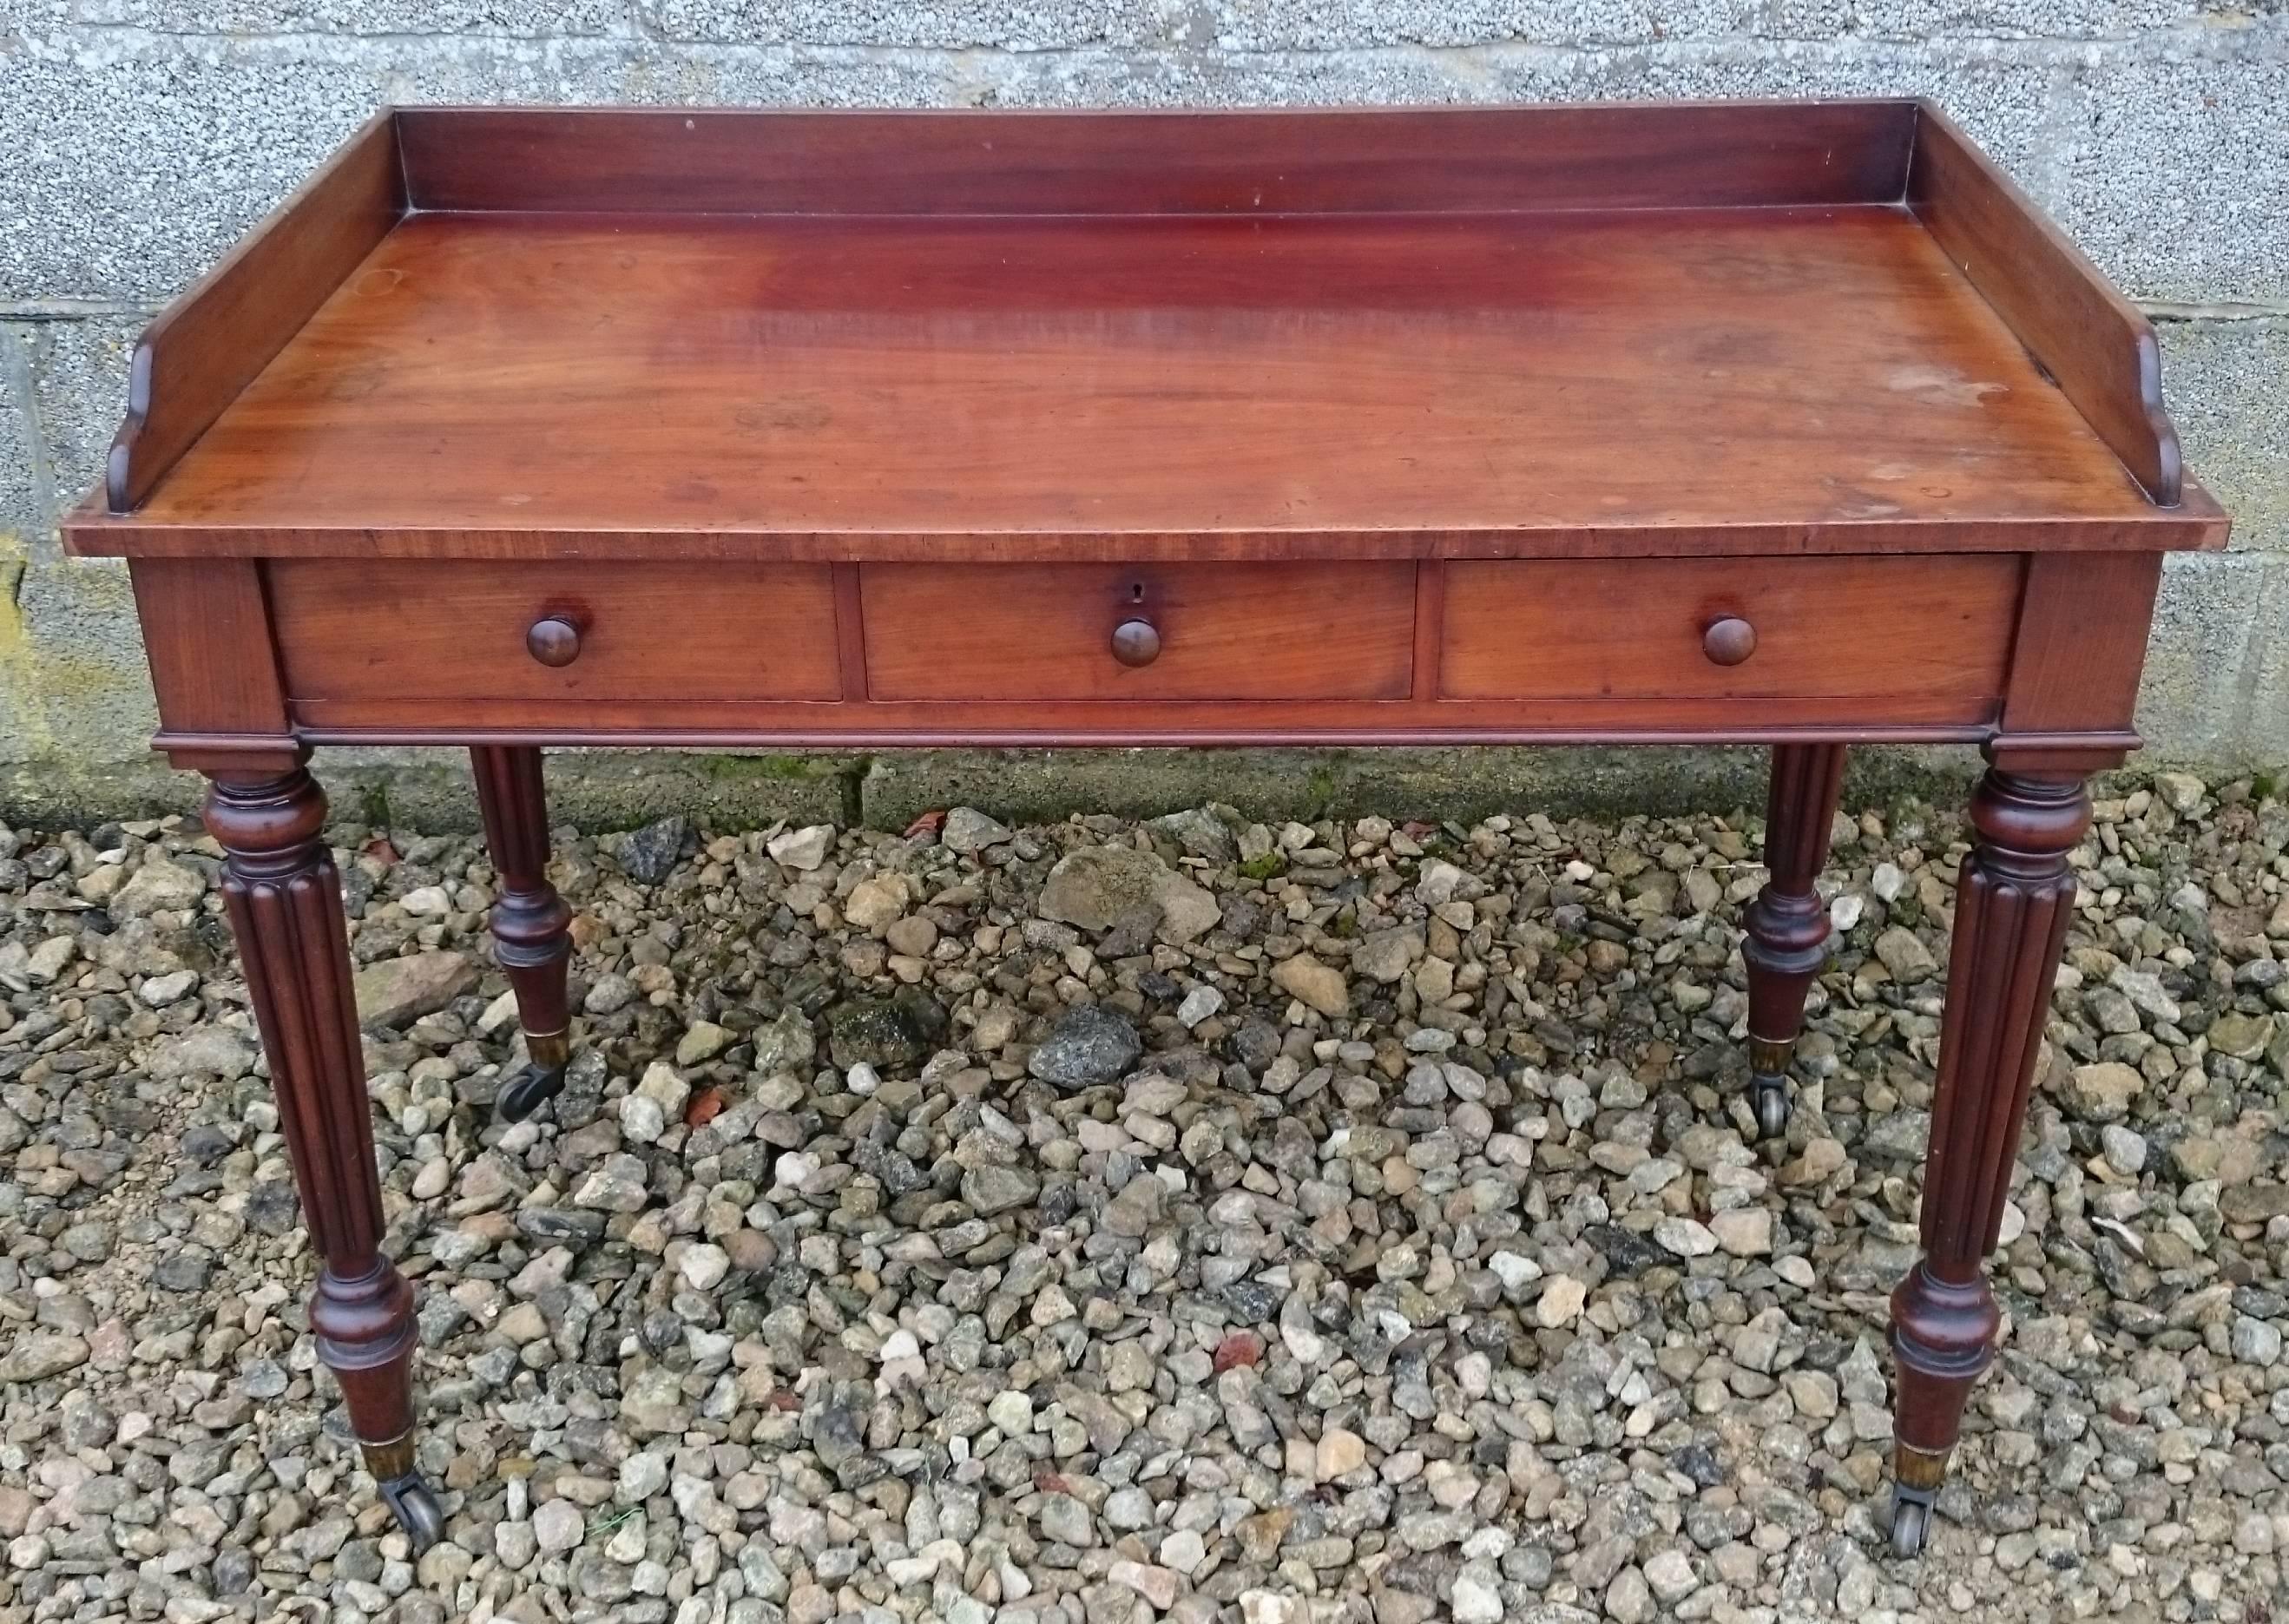 Early 19th century Regency mahogany antique dressing table or side table standing on the classic Gillow leg. This design of leg is found in the Gillow pattern books and the quality of the timber and construction is also very much Gillows. There are